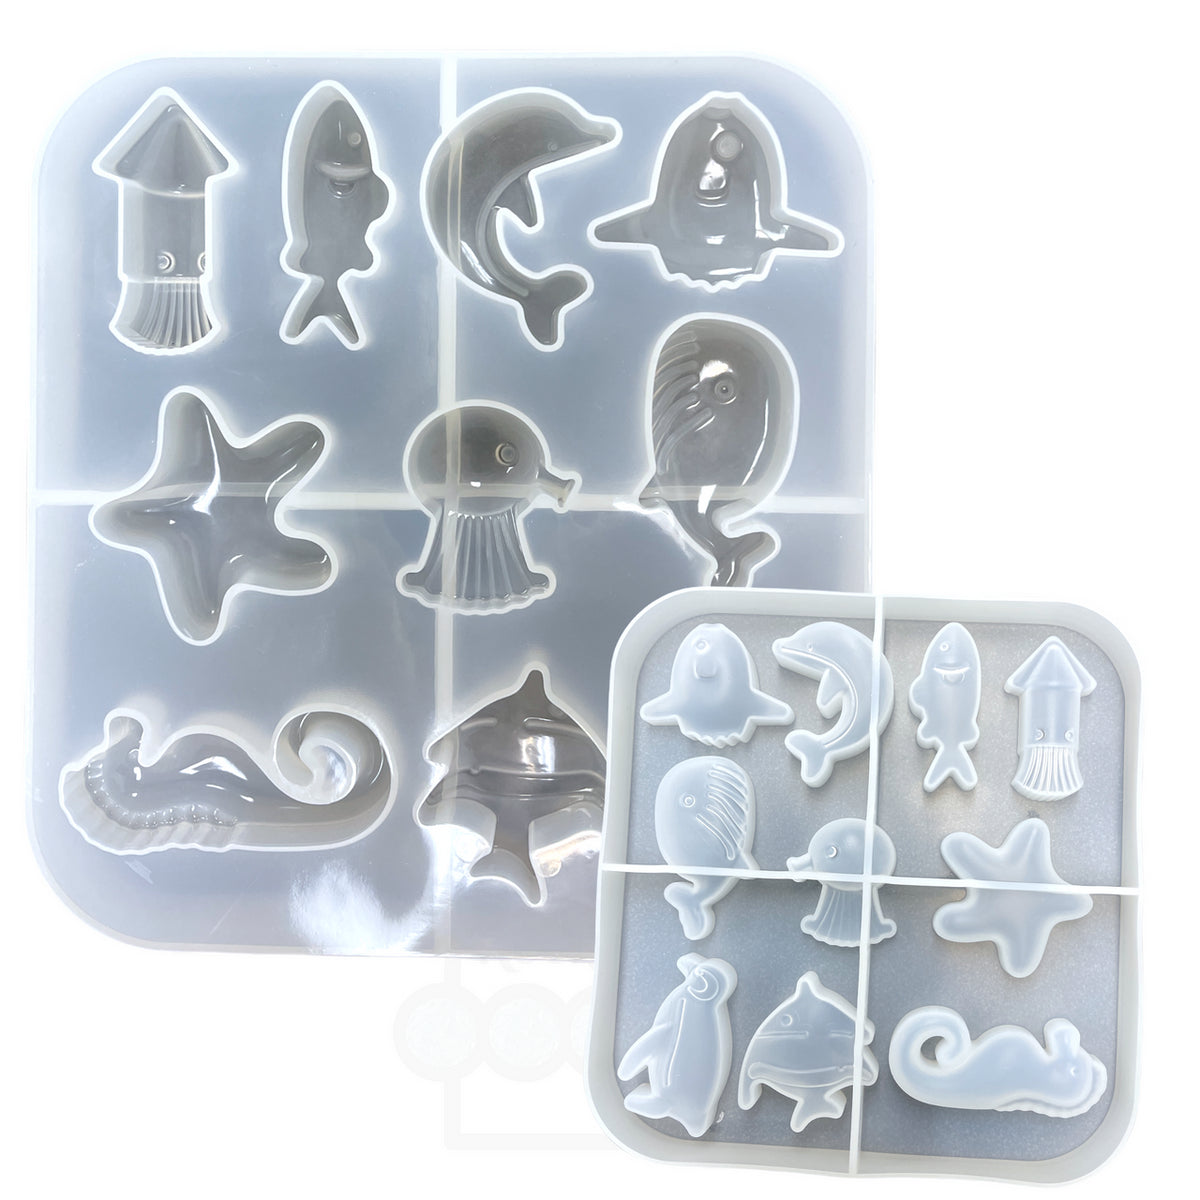 UV Safe Sea Creatures Charm Set Silicone Mold for UV or Epoxy Resin Art